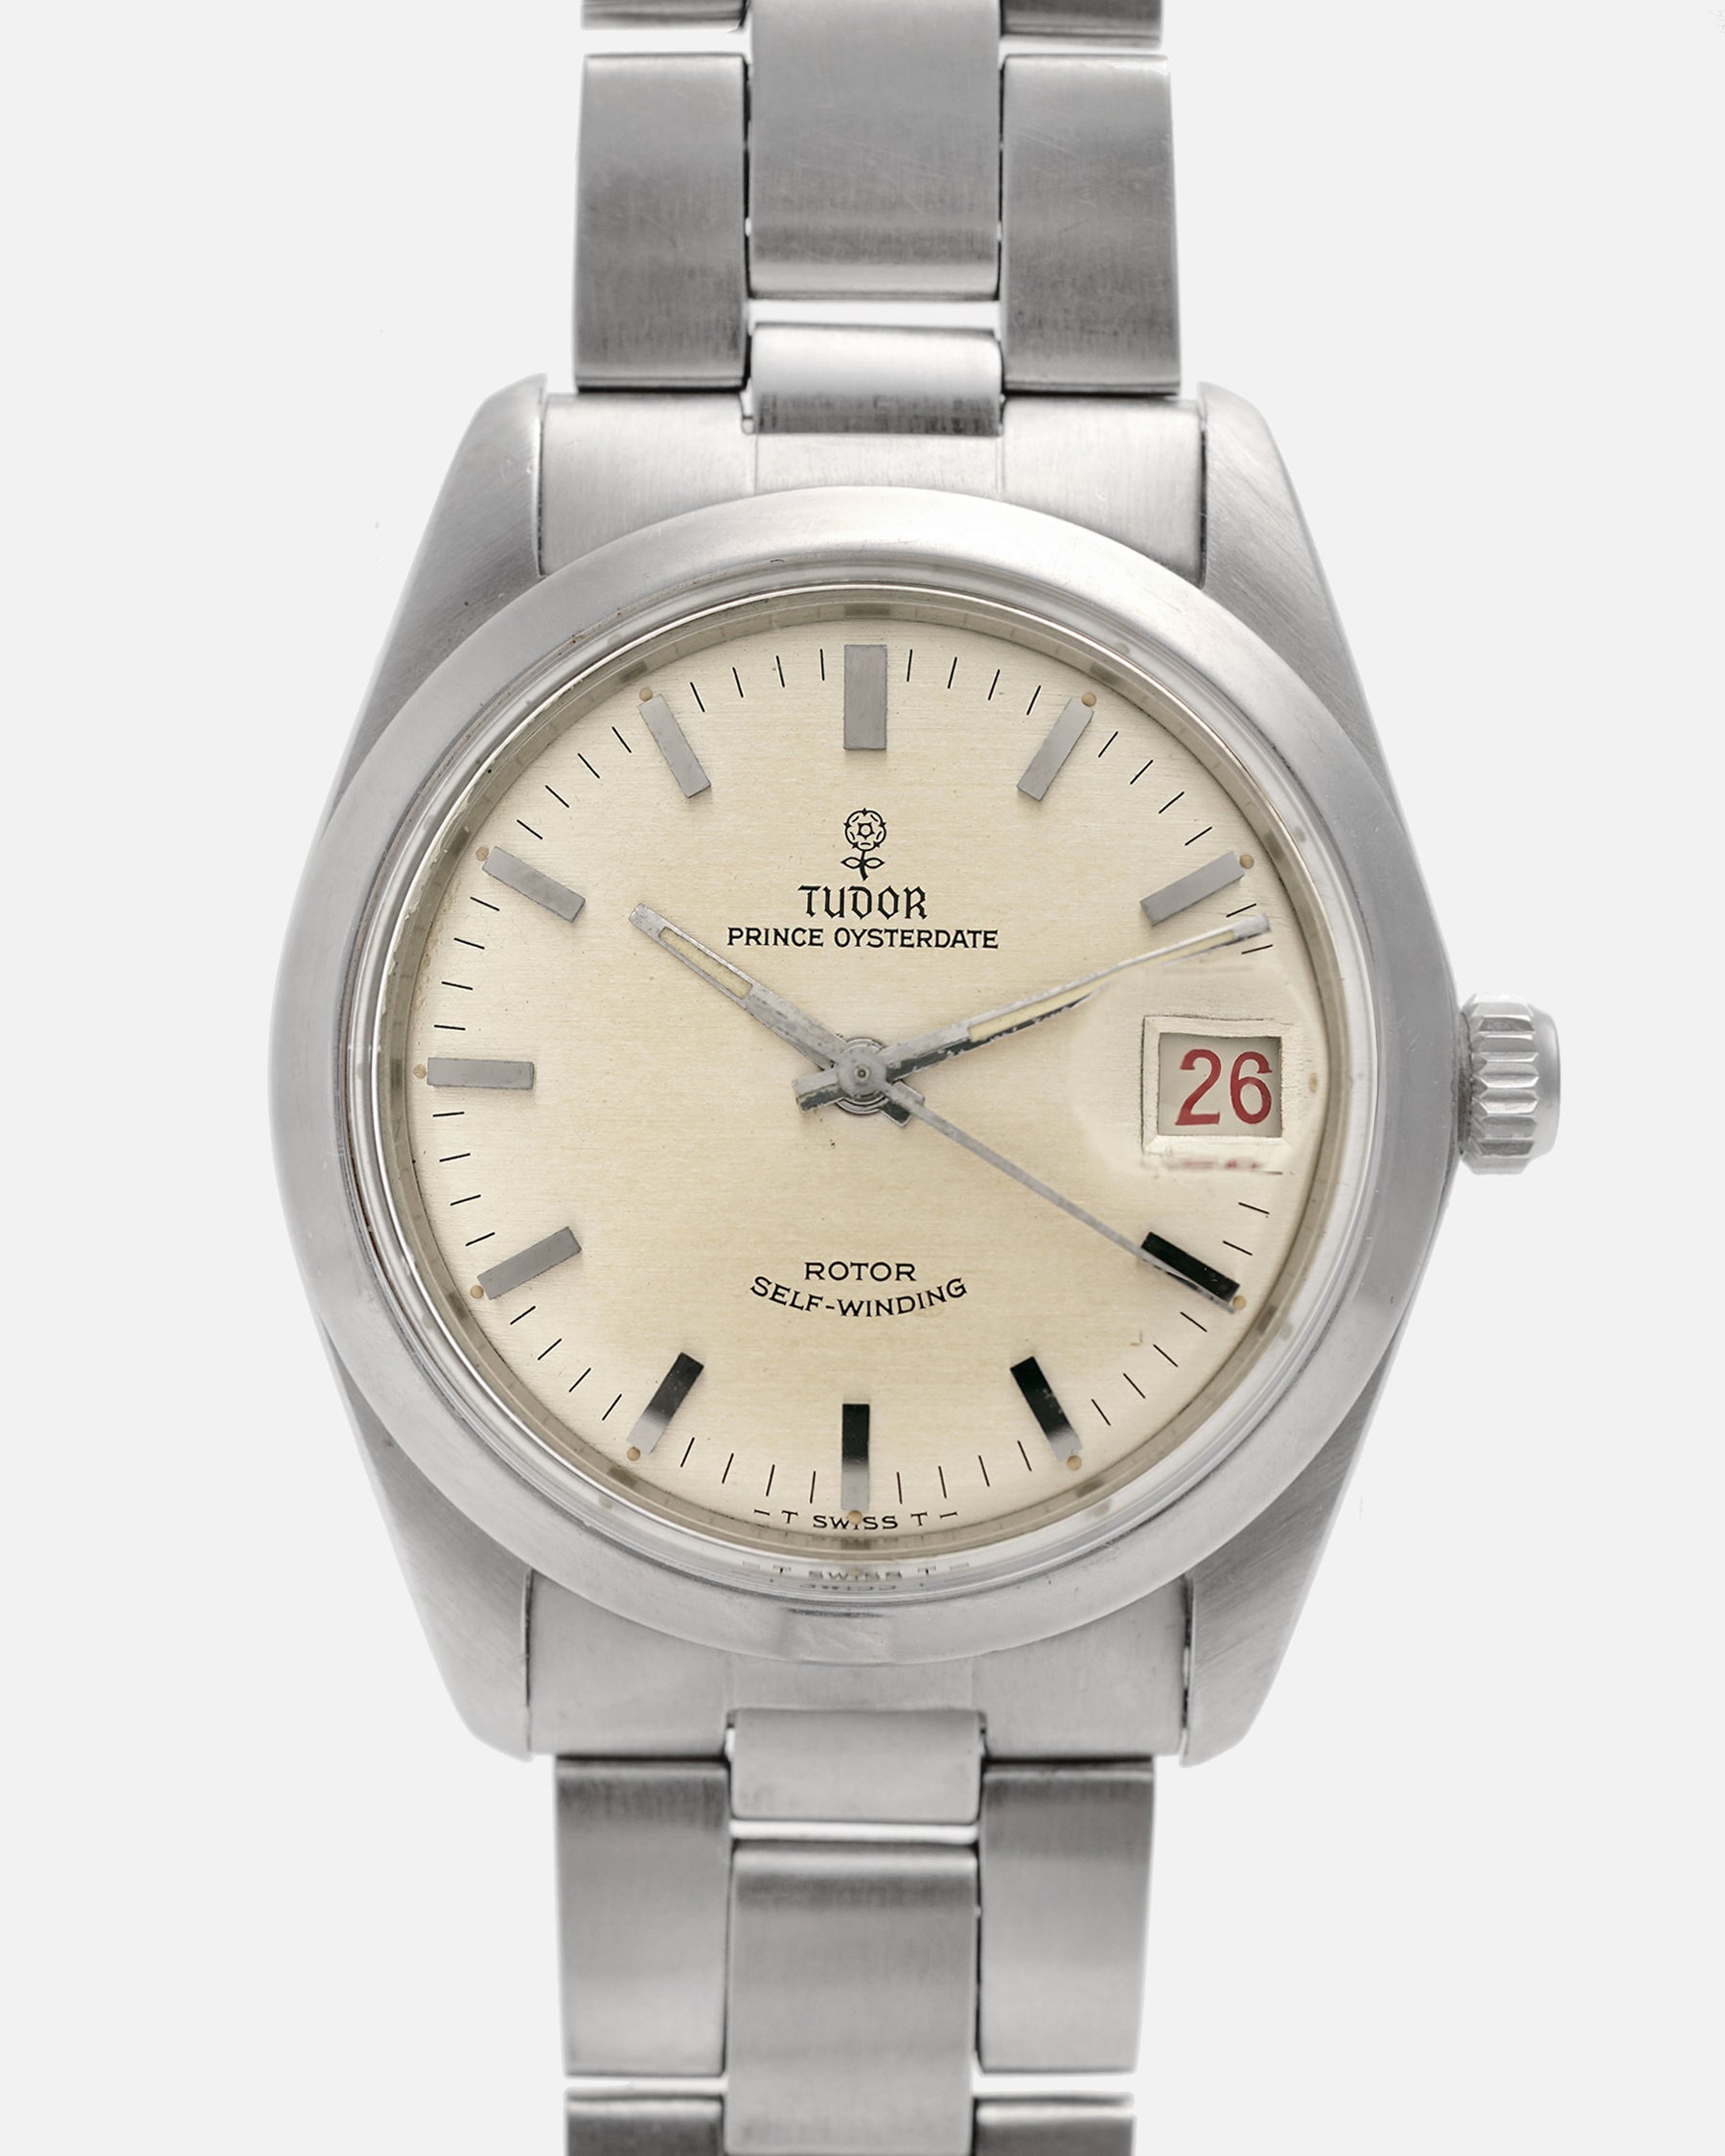 1963 Tudor Prince Oyster Date 'Small Rose' | Ref. 7996/0 | With 'Roulette' Date